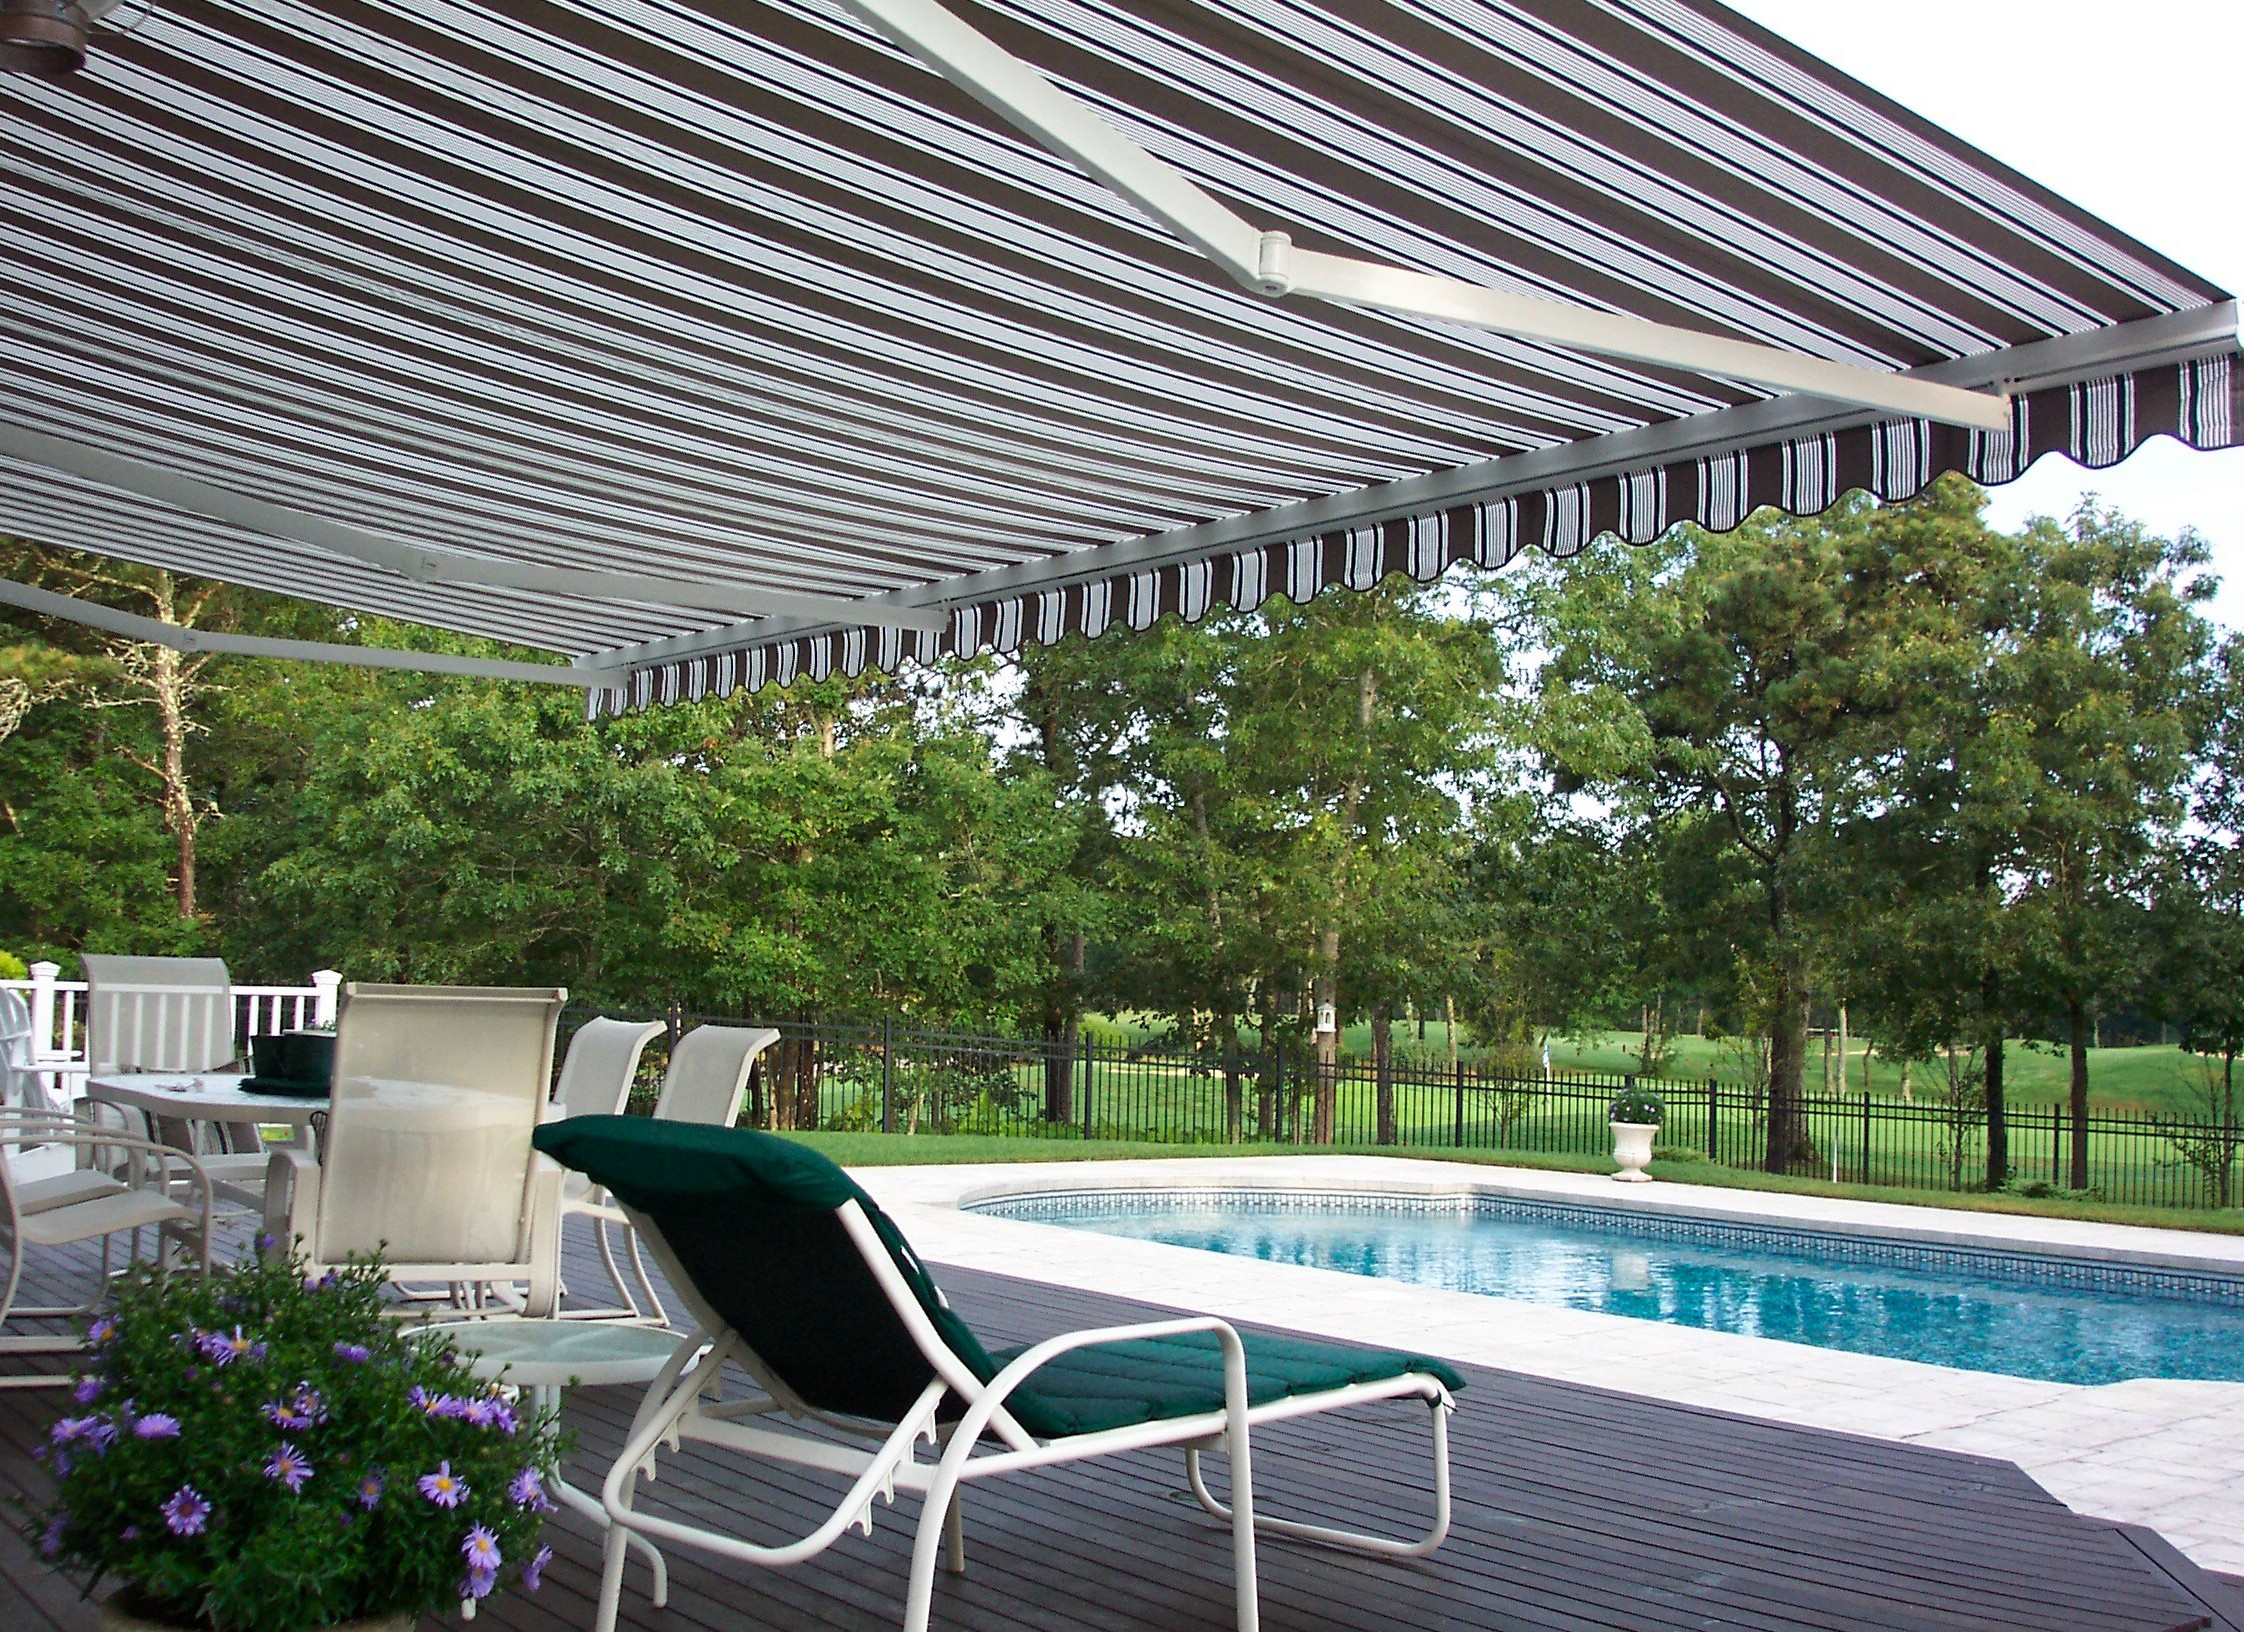 Retractable Awning Review